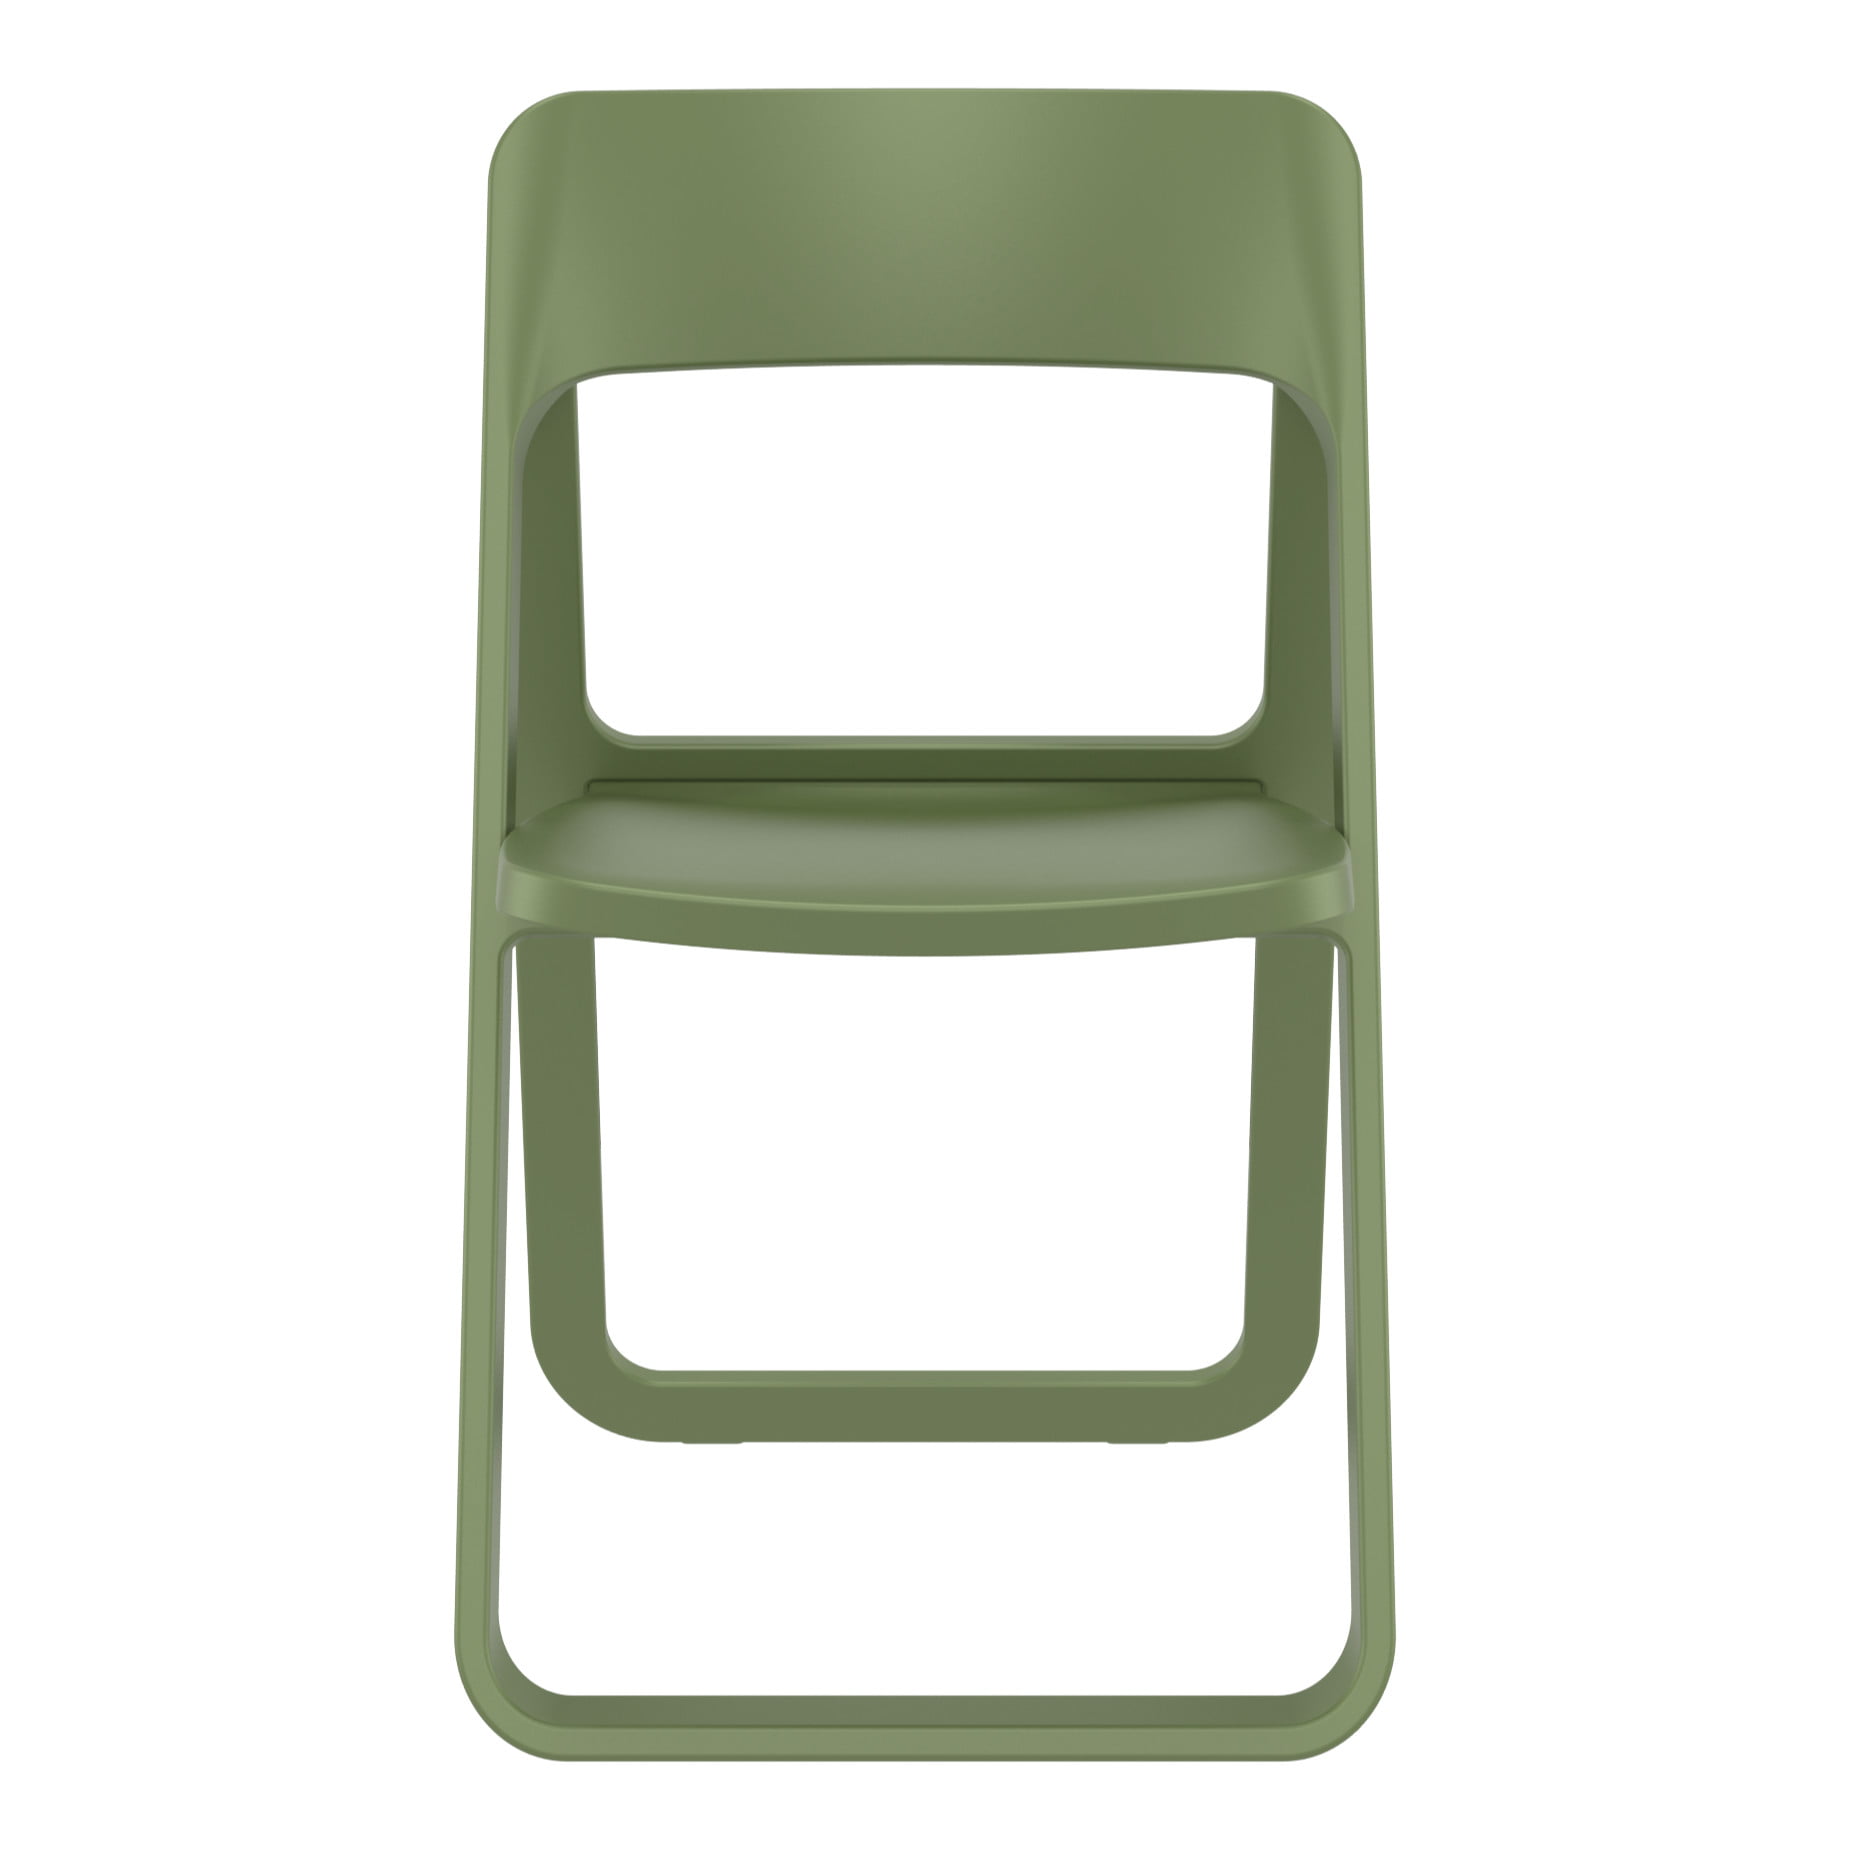 Isp079-olg Dream Folding Outdoor Chair, Olive Green